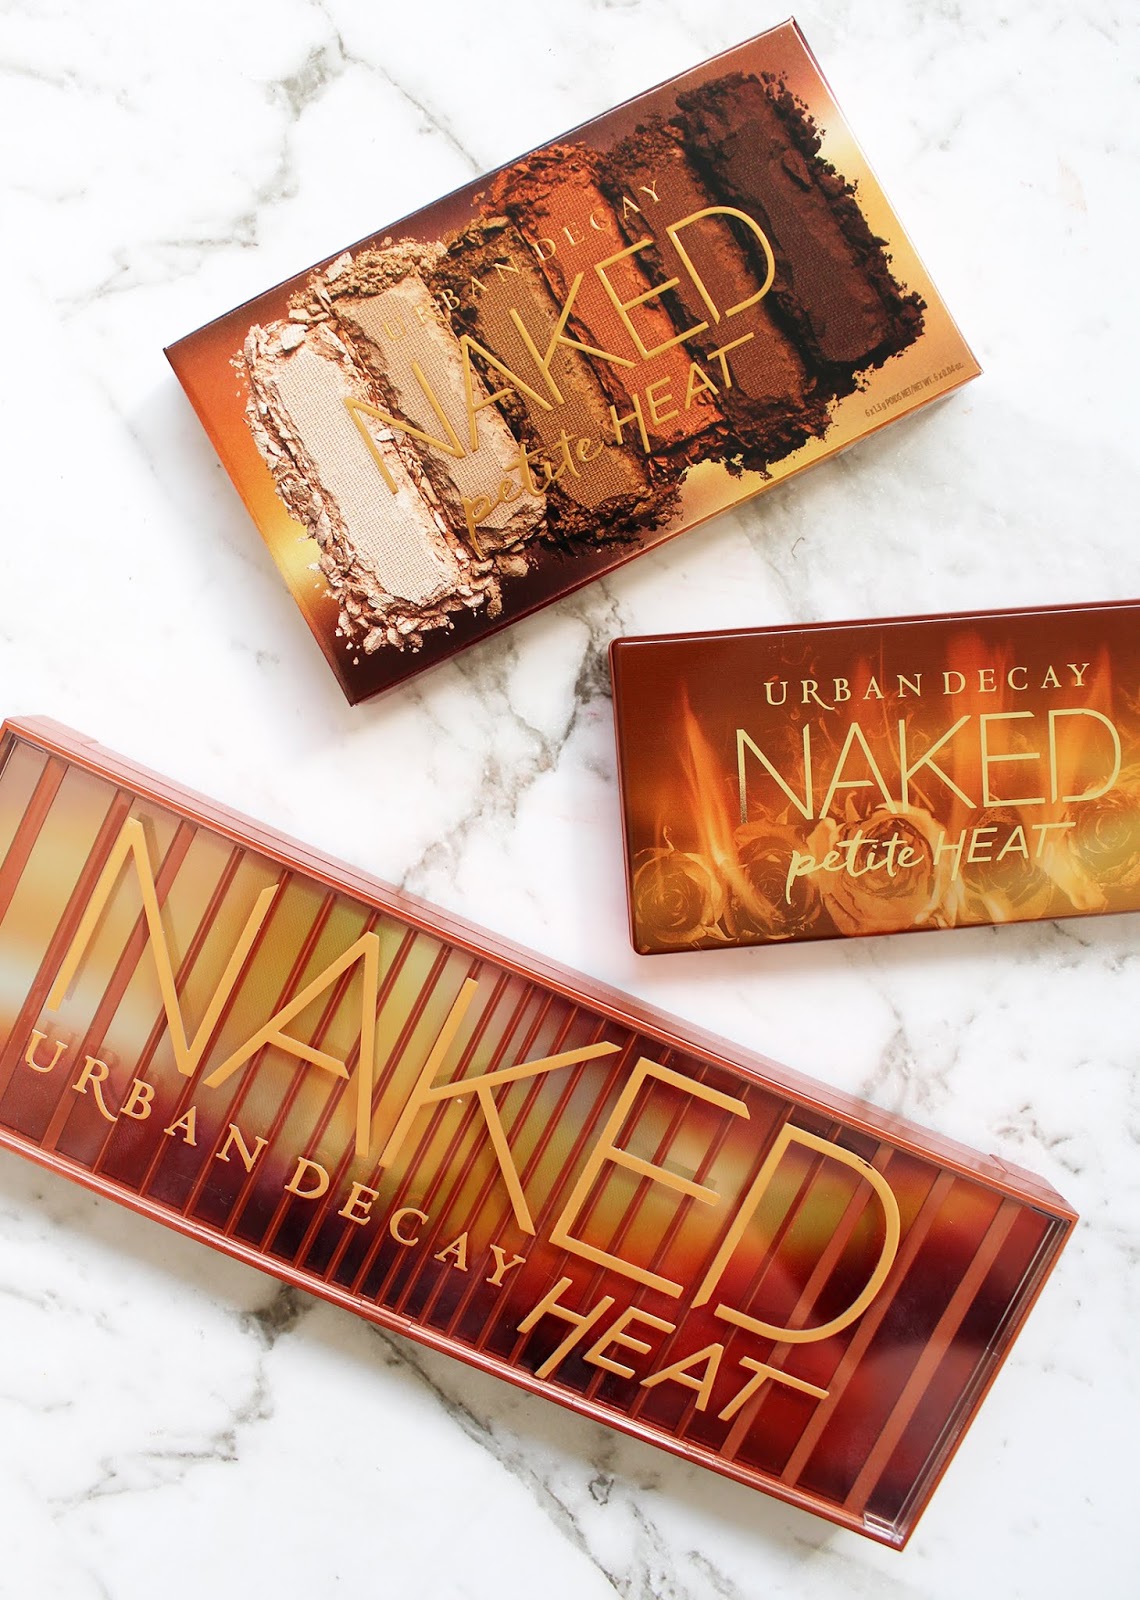 Urban Decays New Naked Palette Looks Just Like Kylie Jenners